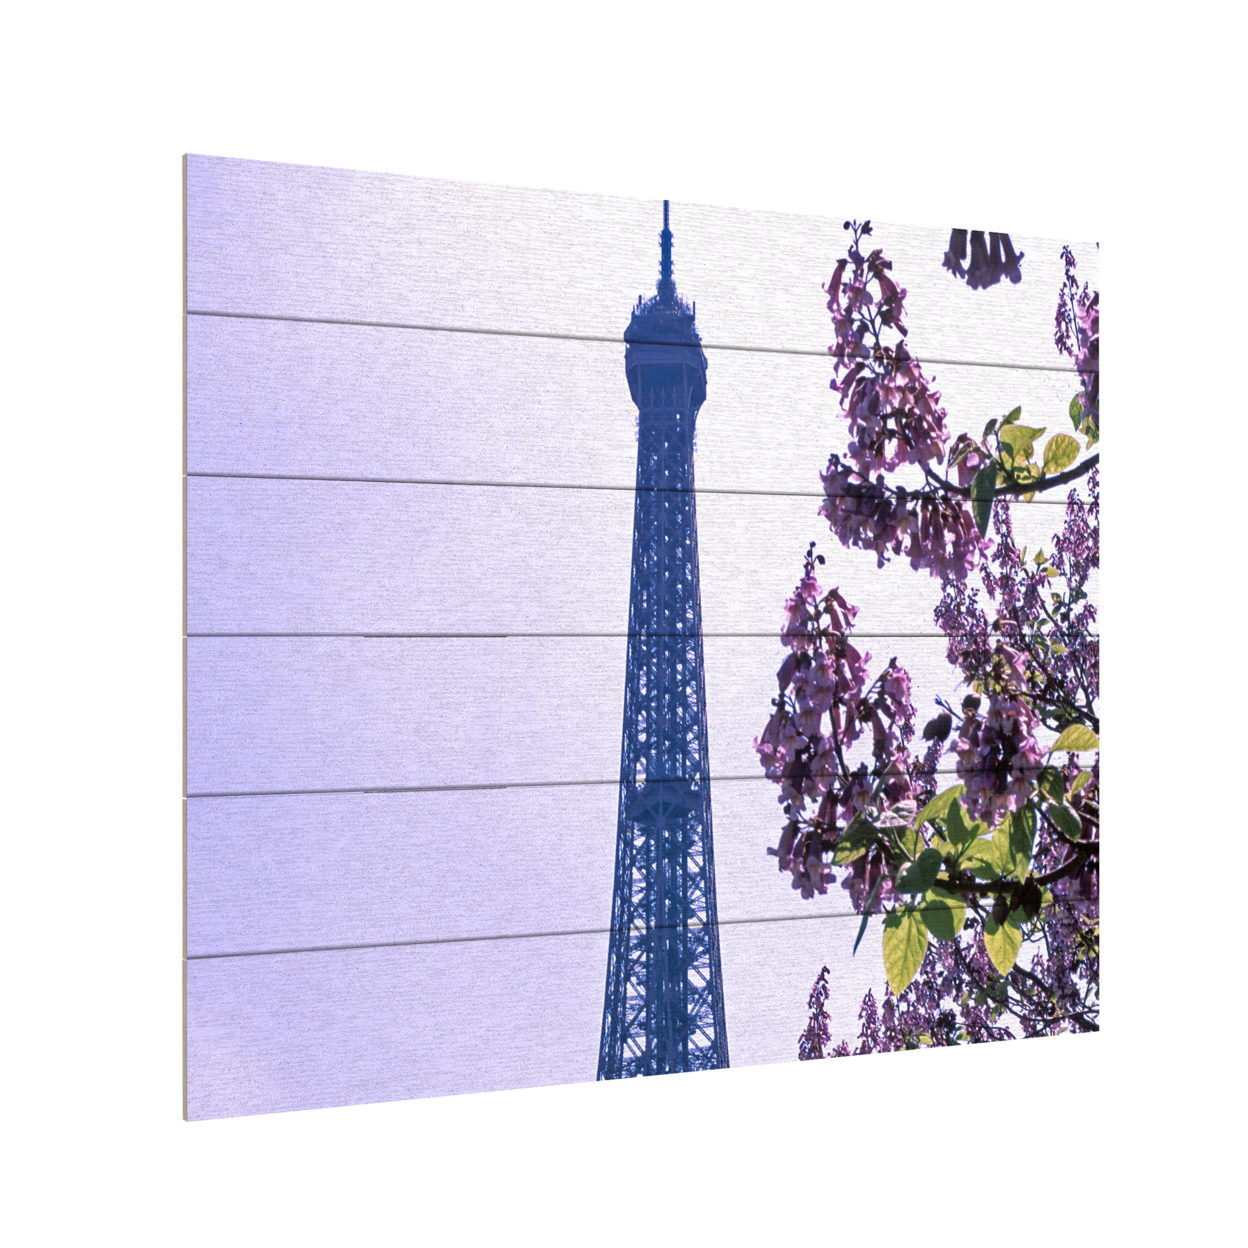 Wooden Slat Art 18 X 22 Inches Titled Eiffel Tower With Blossoms Ready To Hang Home Decor Picture